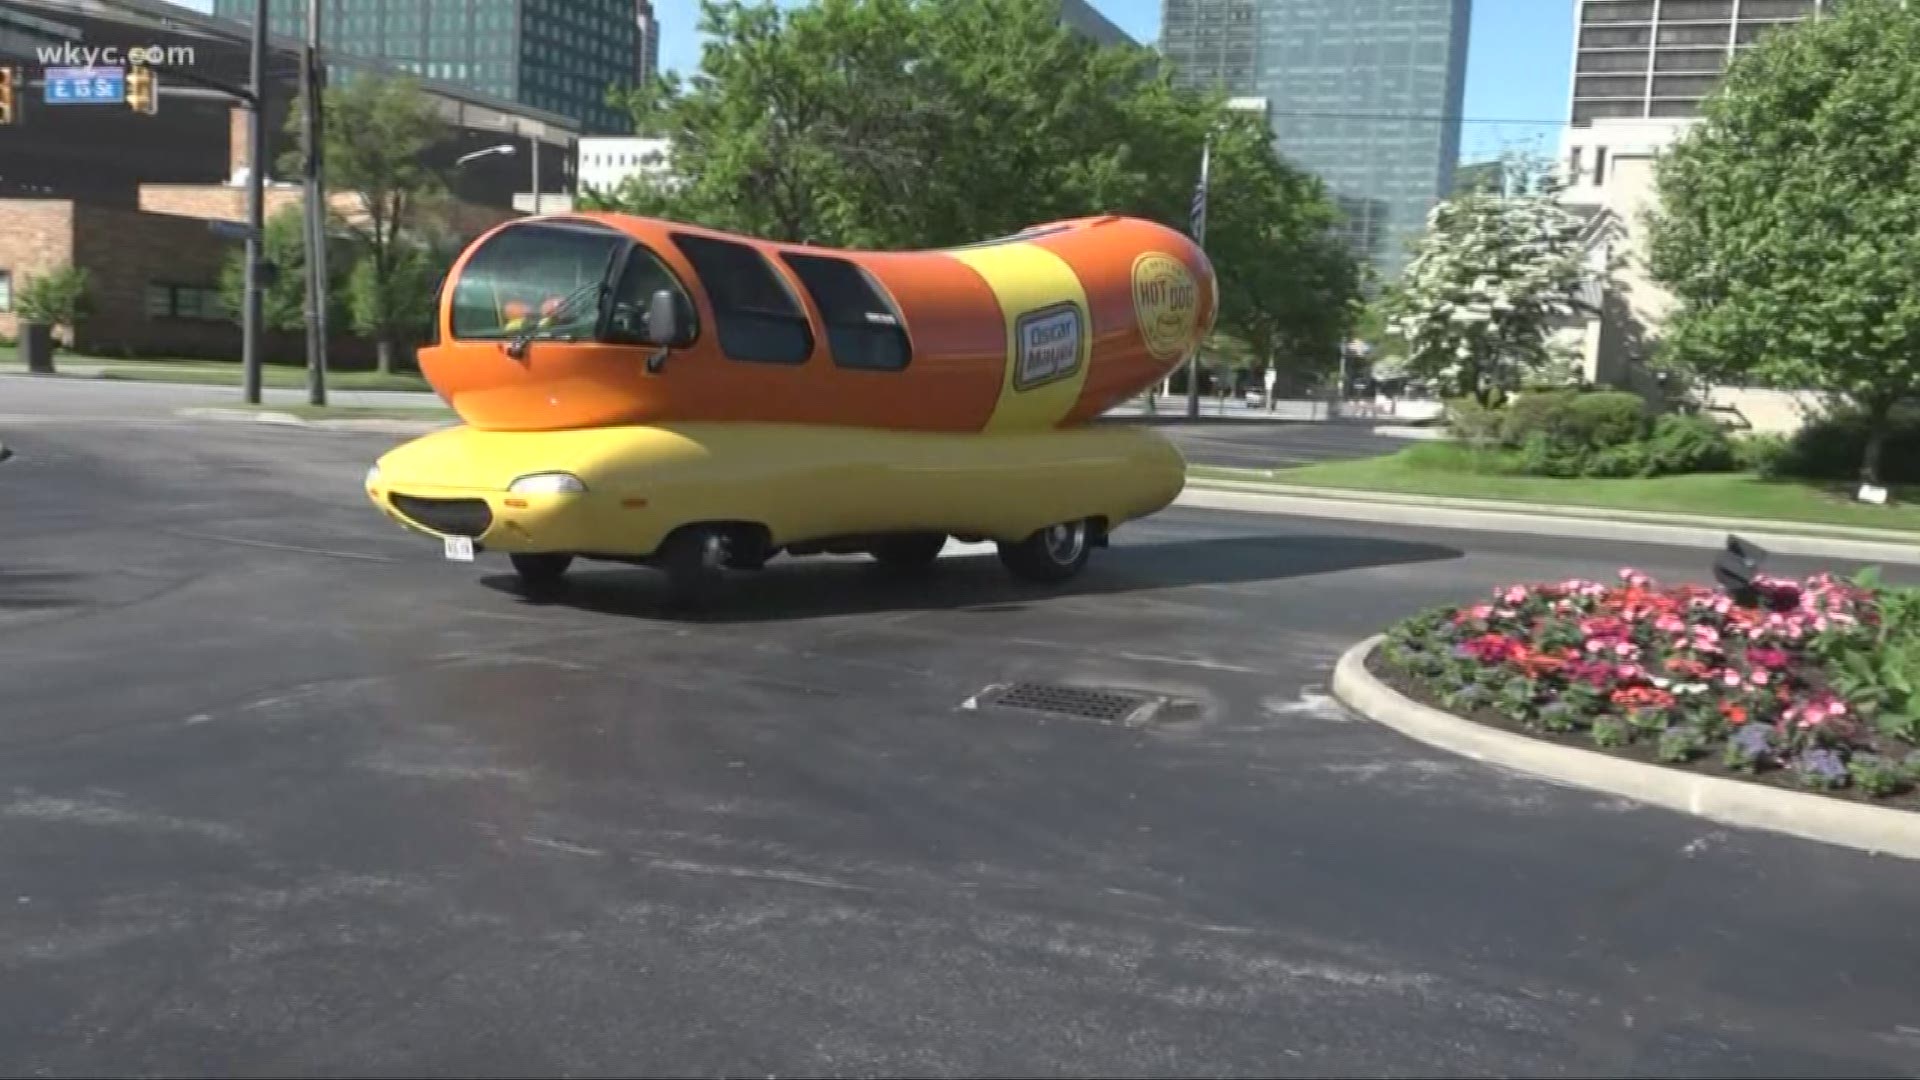 Jan. 7, 2020: The job is full-time for one year where you will drive across the country to represent the Oscar Mayer brand.